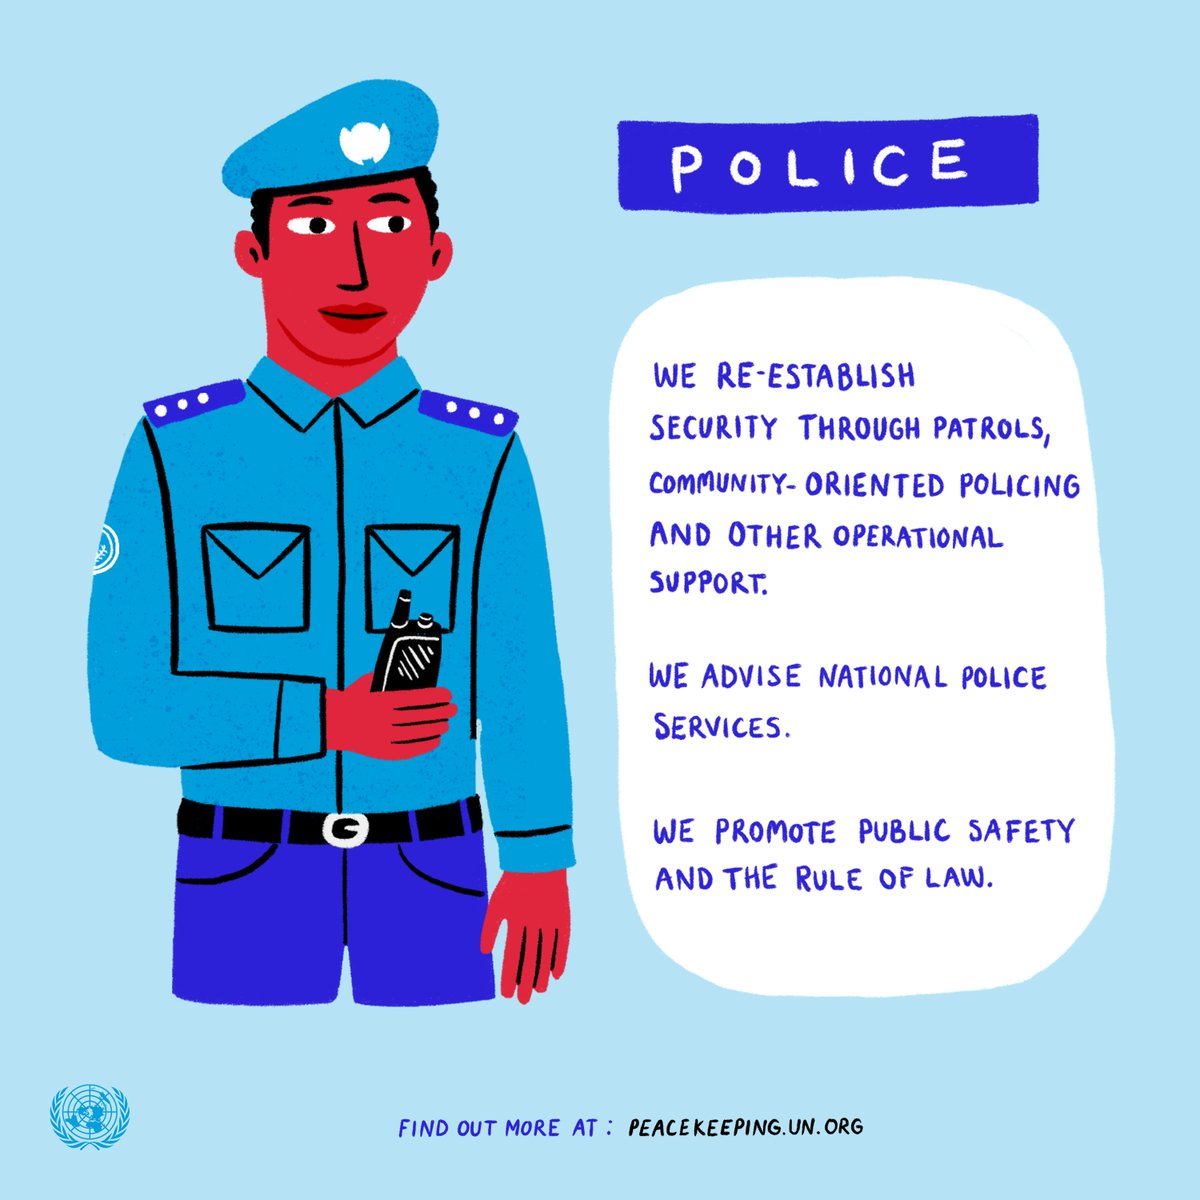 Since the first 🚨 @UNPOL deployment in 1960, tens of thousands of women & men police officers from 130+ countries have brought together their policing expertise to protect populations. Here's what they do👇